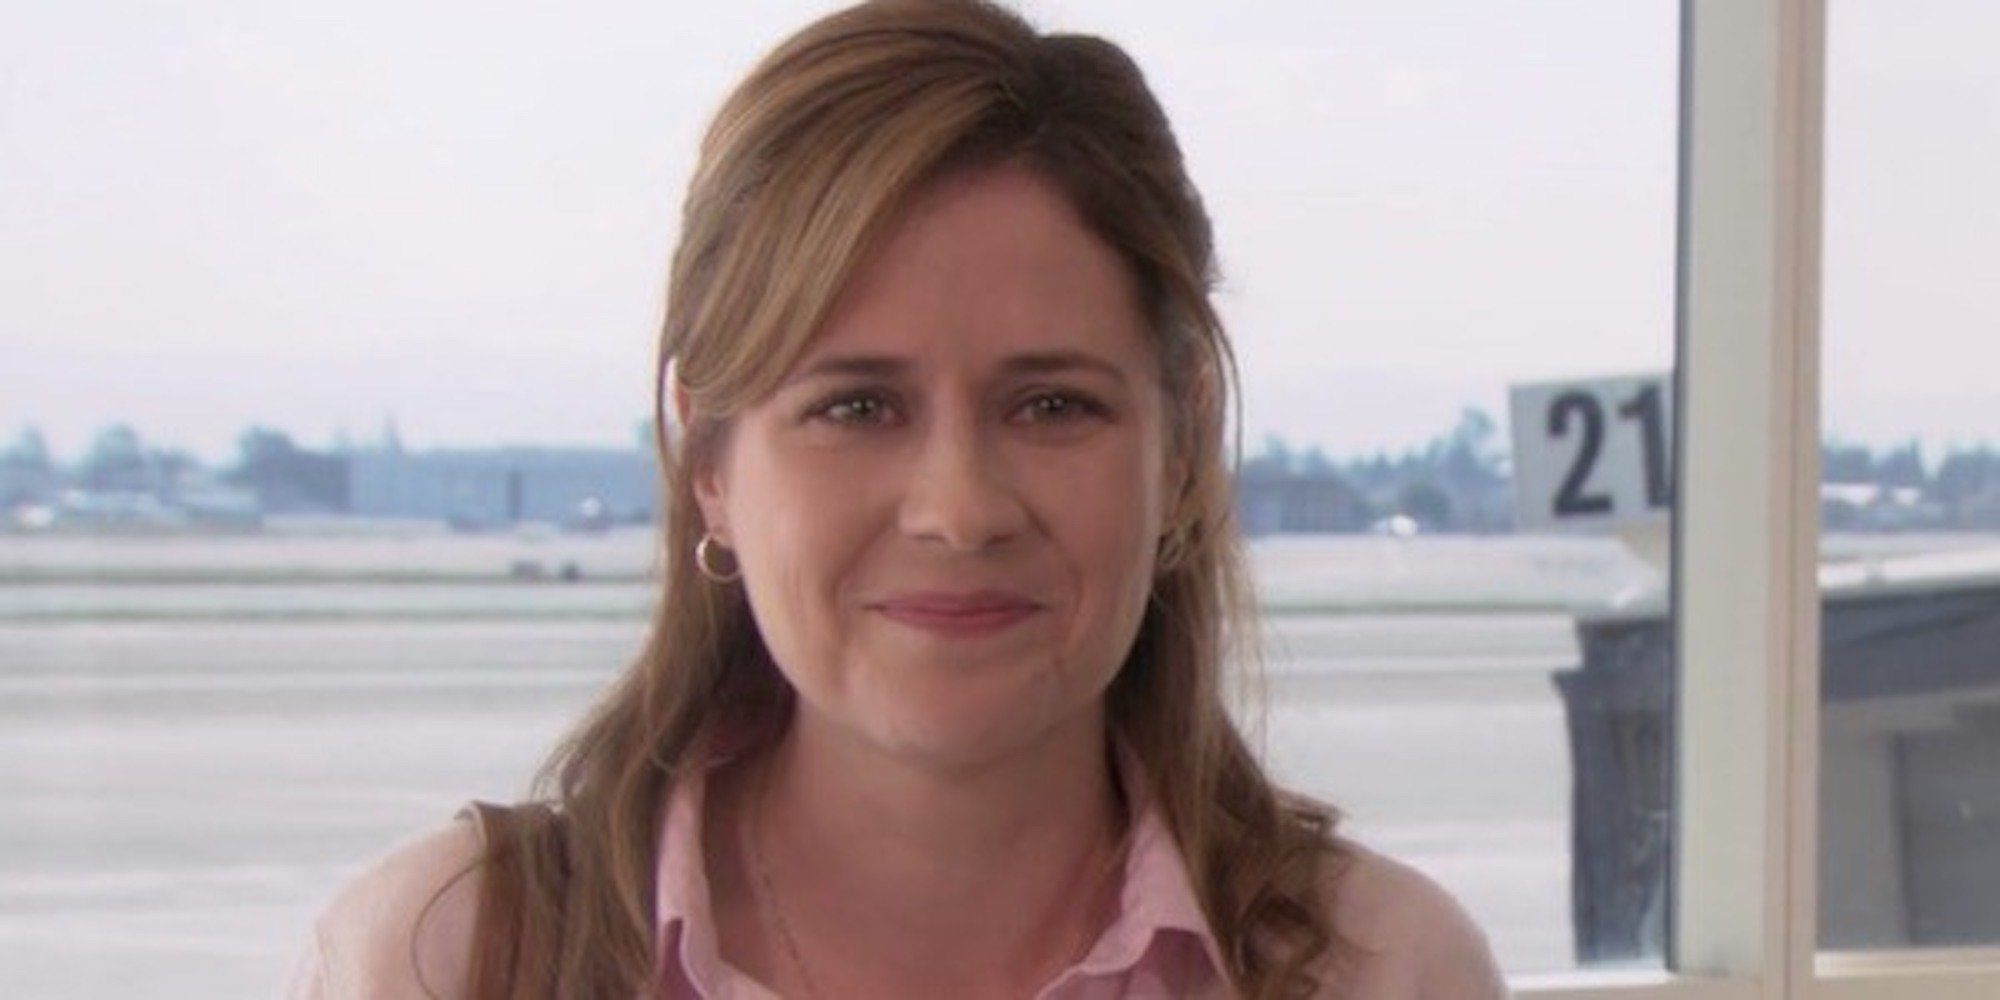 Jenna Fischer as Pam Halpert looking into the camera at the airport in 'The Office' episode 'Goodbye Michael'